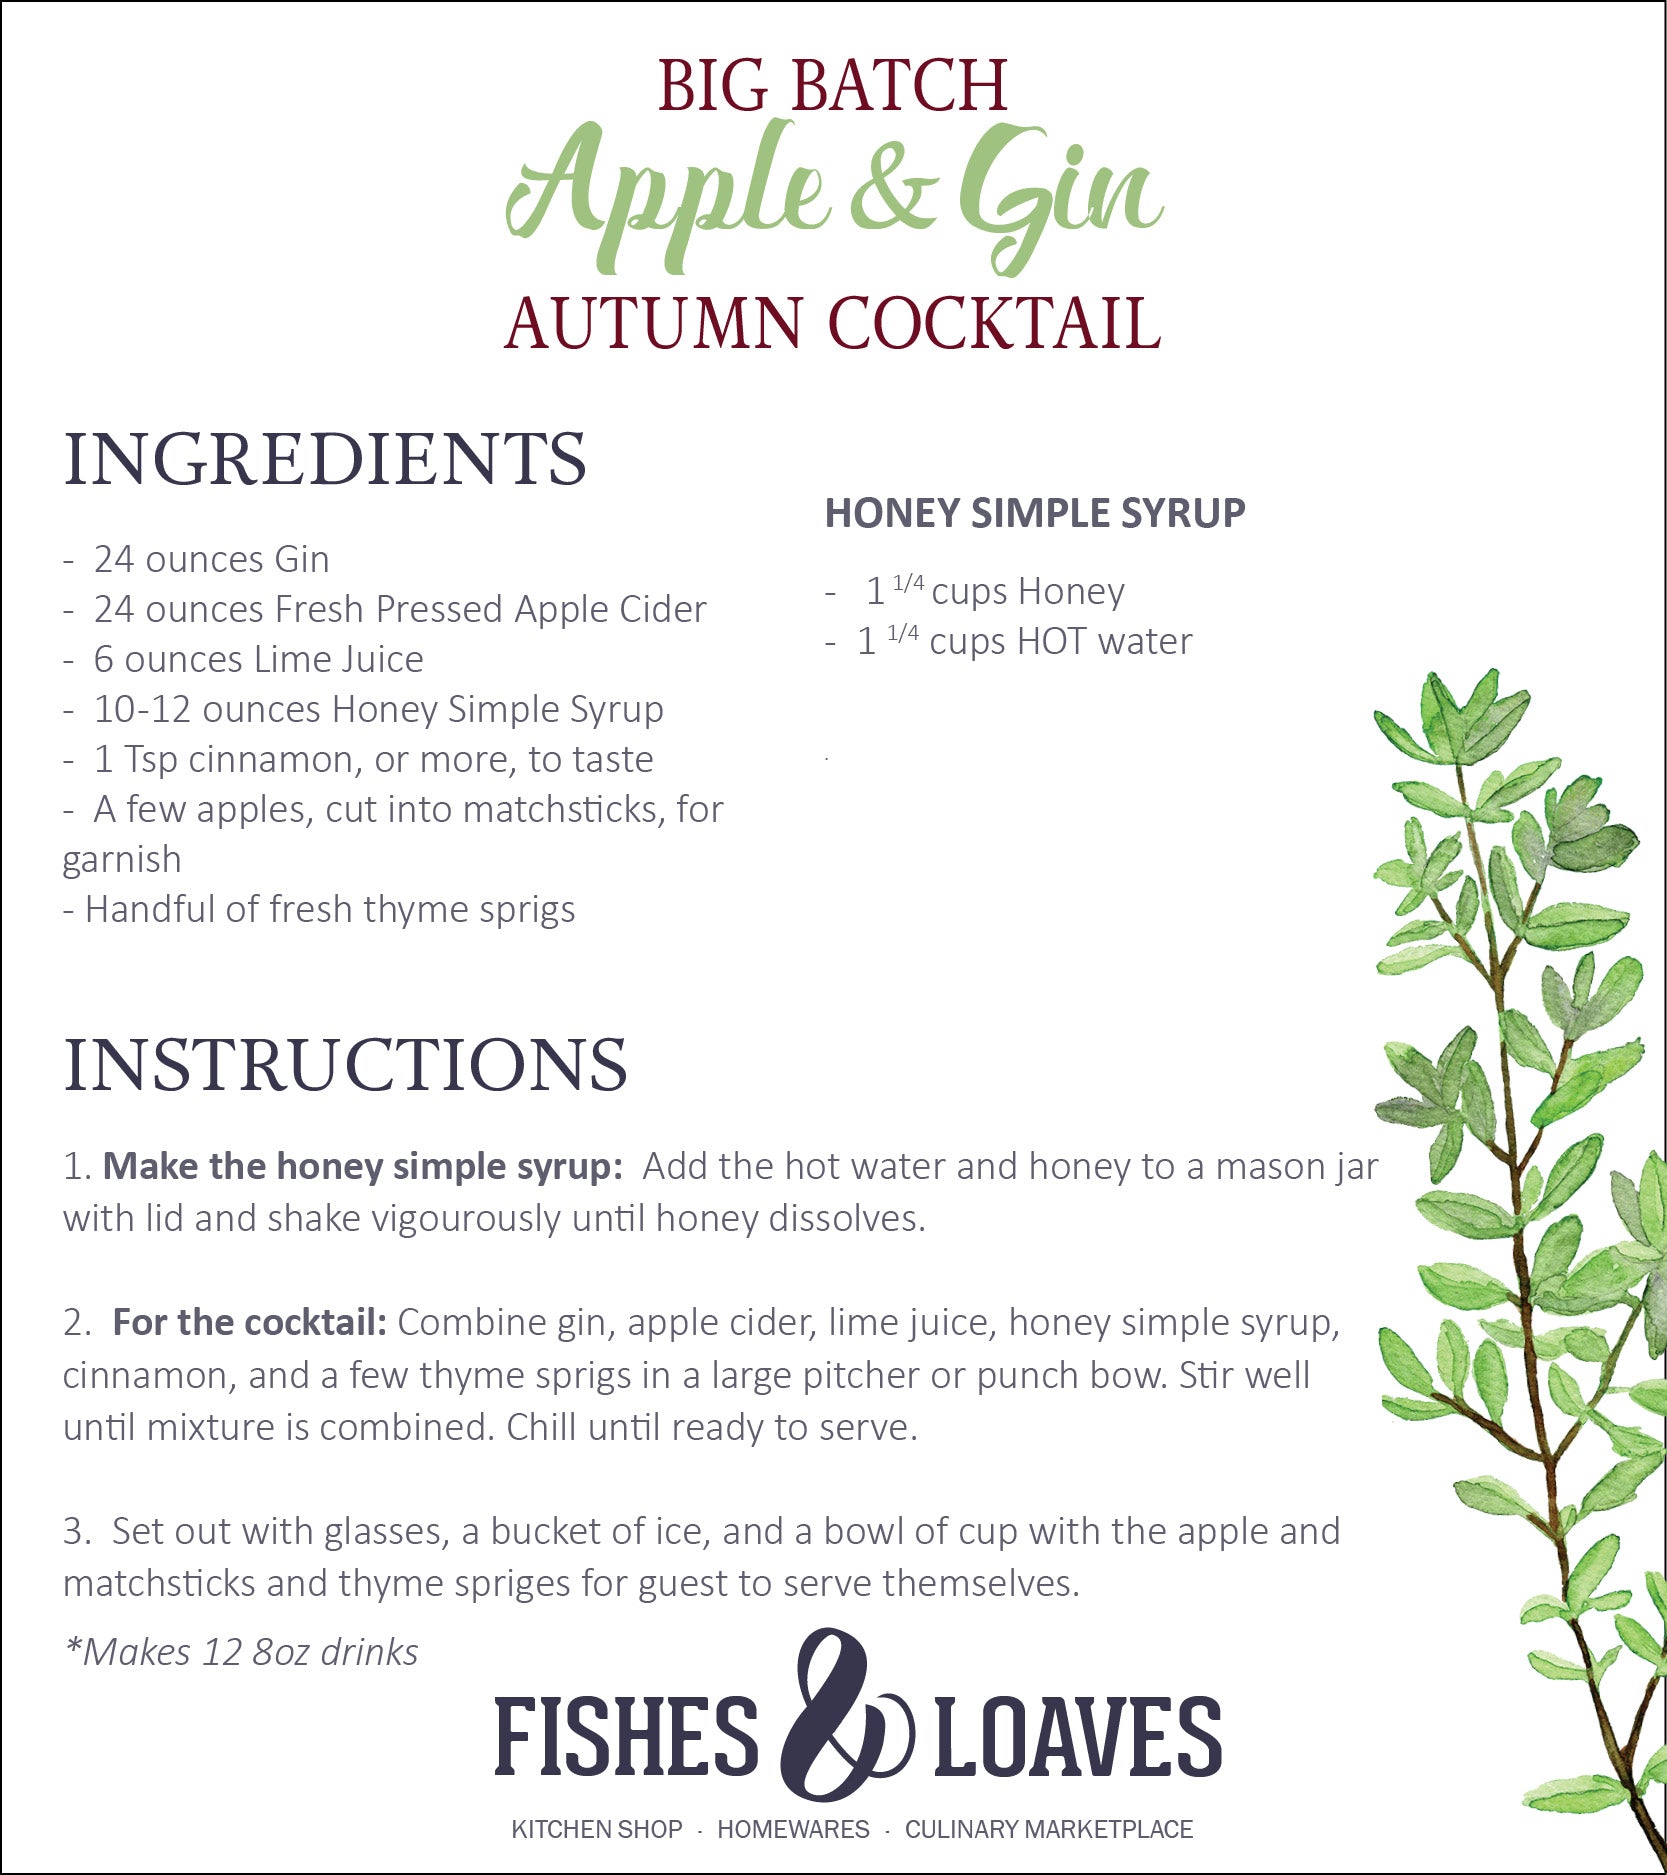 Thanksgiving Cocktail - Apple and Gin Autumn Cocktail Recipe